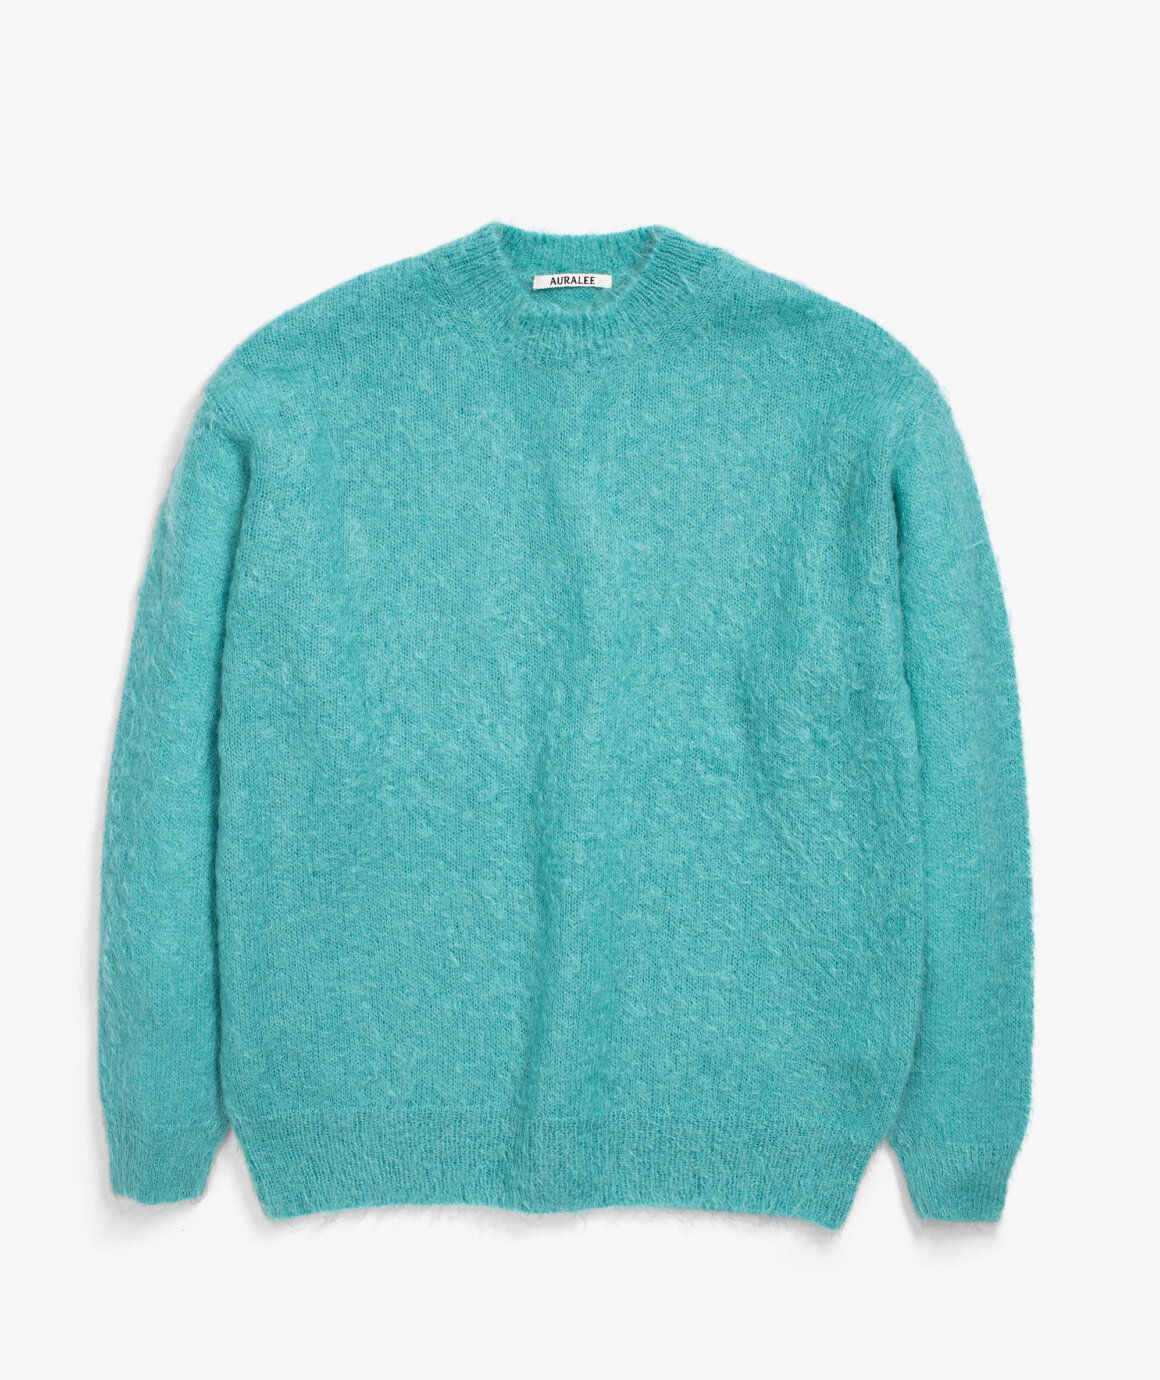 Norse Store | Shipping Worldwide - Auralee BRUSHED SUPER KID MOHAIR ...